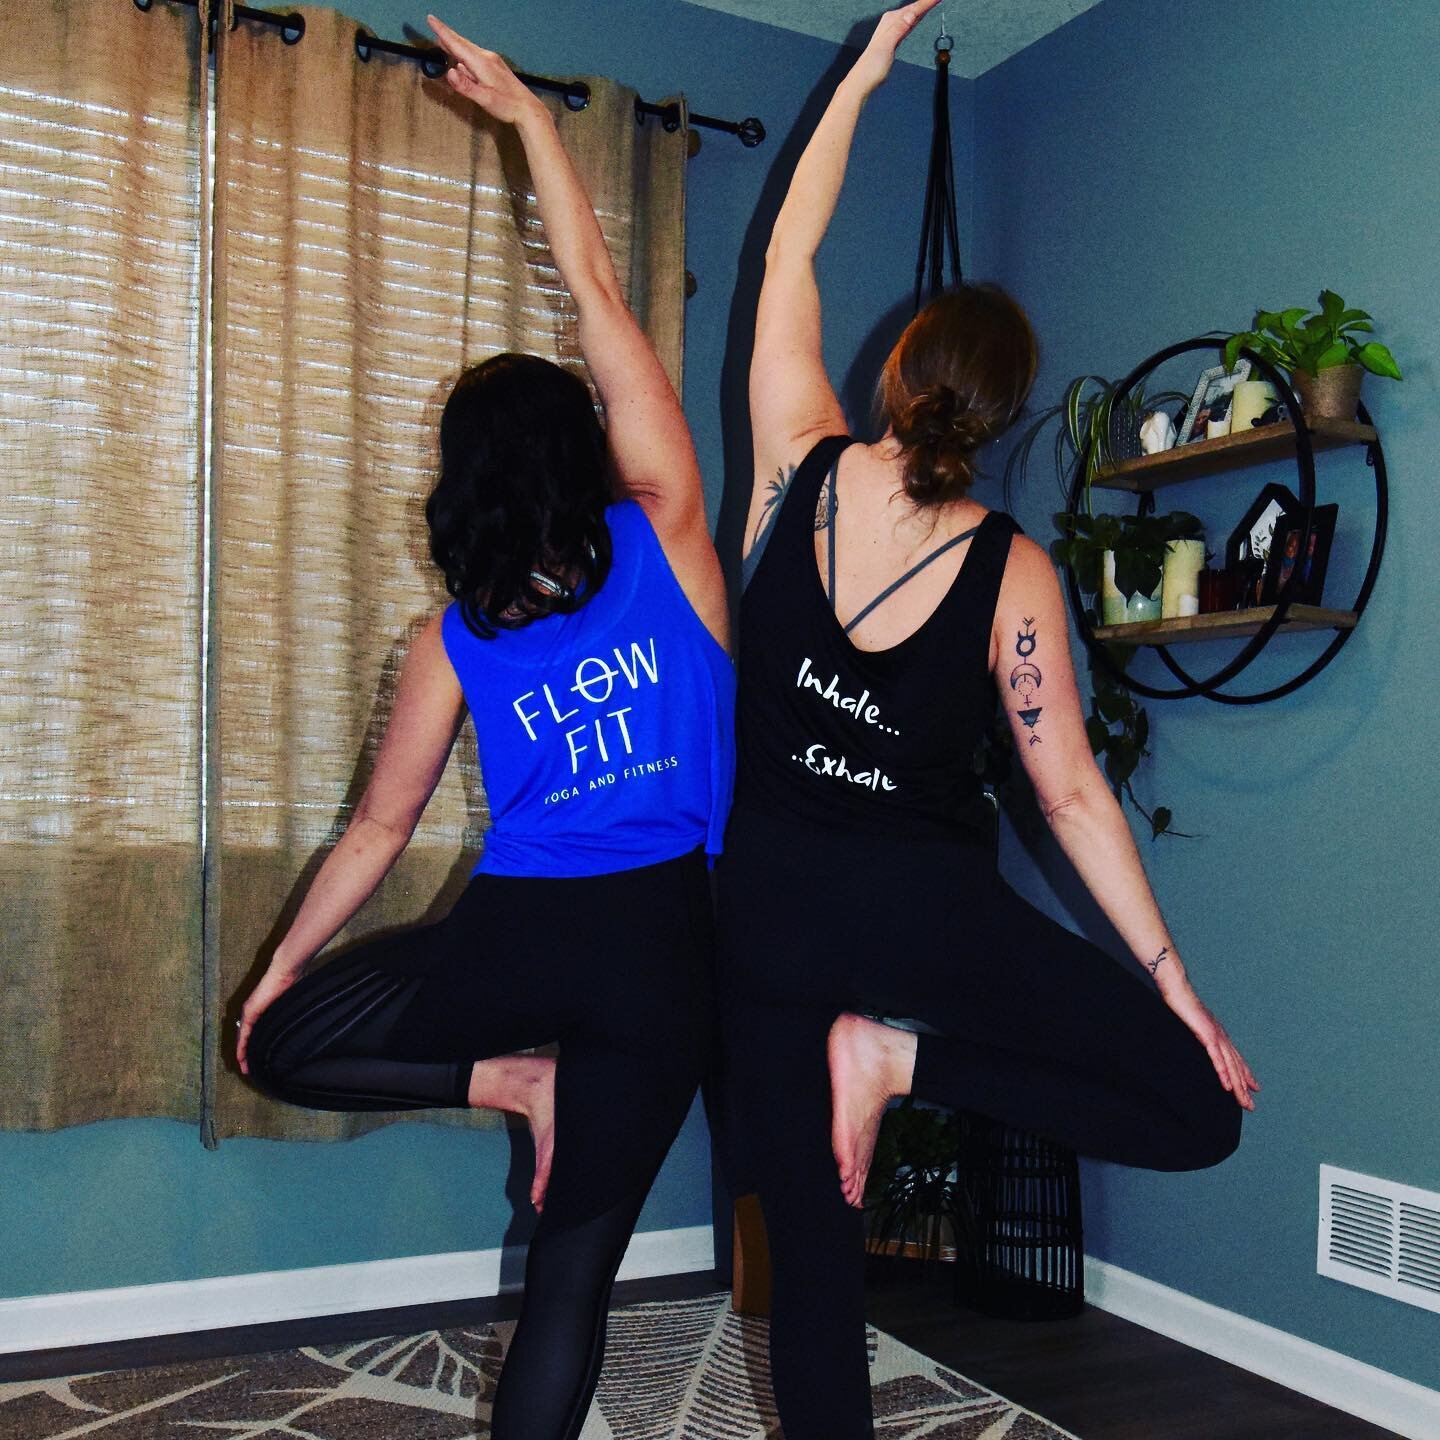 Are you ready to join a community of people ready to take on new challenges and exciting classes?! Our founding memberships are available NOW! 
-Start working out with us virtually right now for FREE 
-Lifetime access to virtual classes 
-Guaranteed 